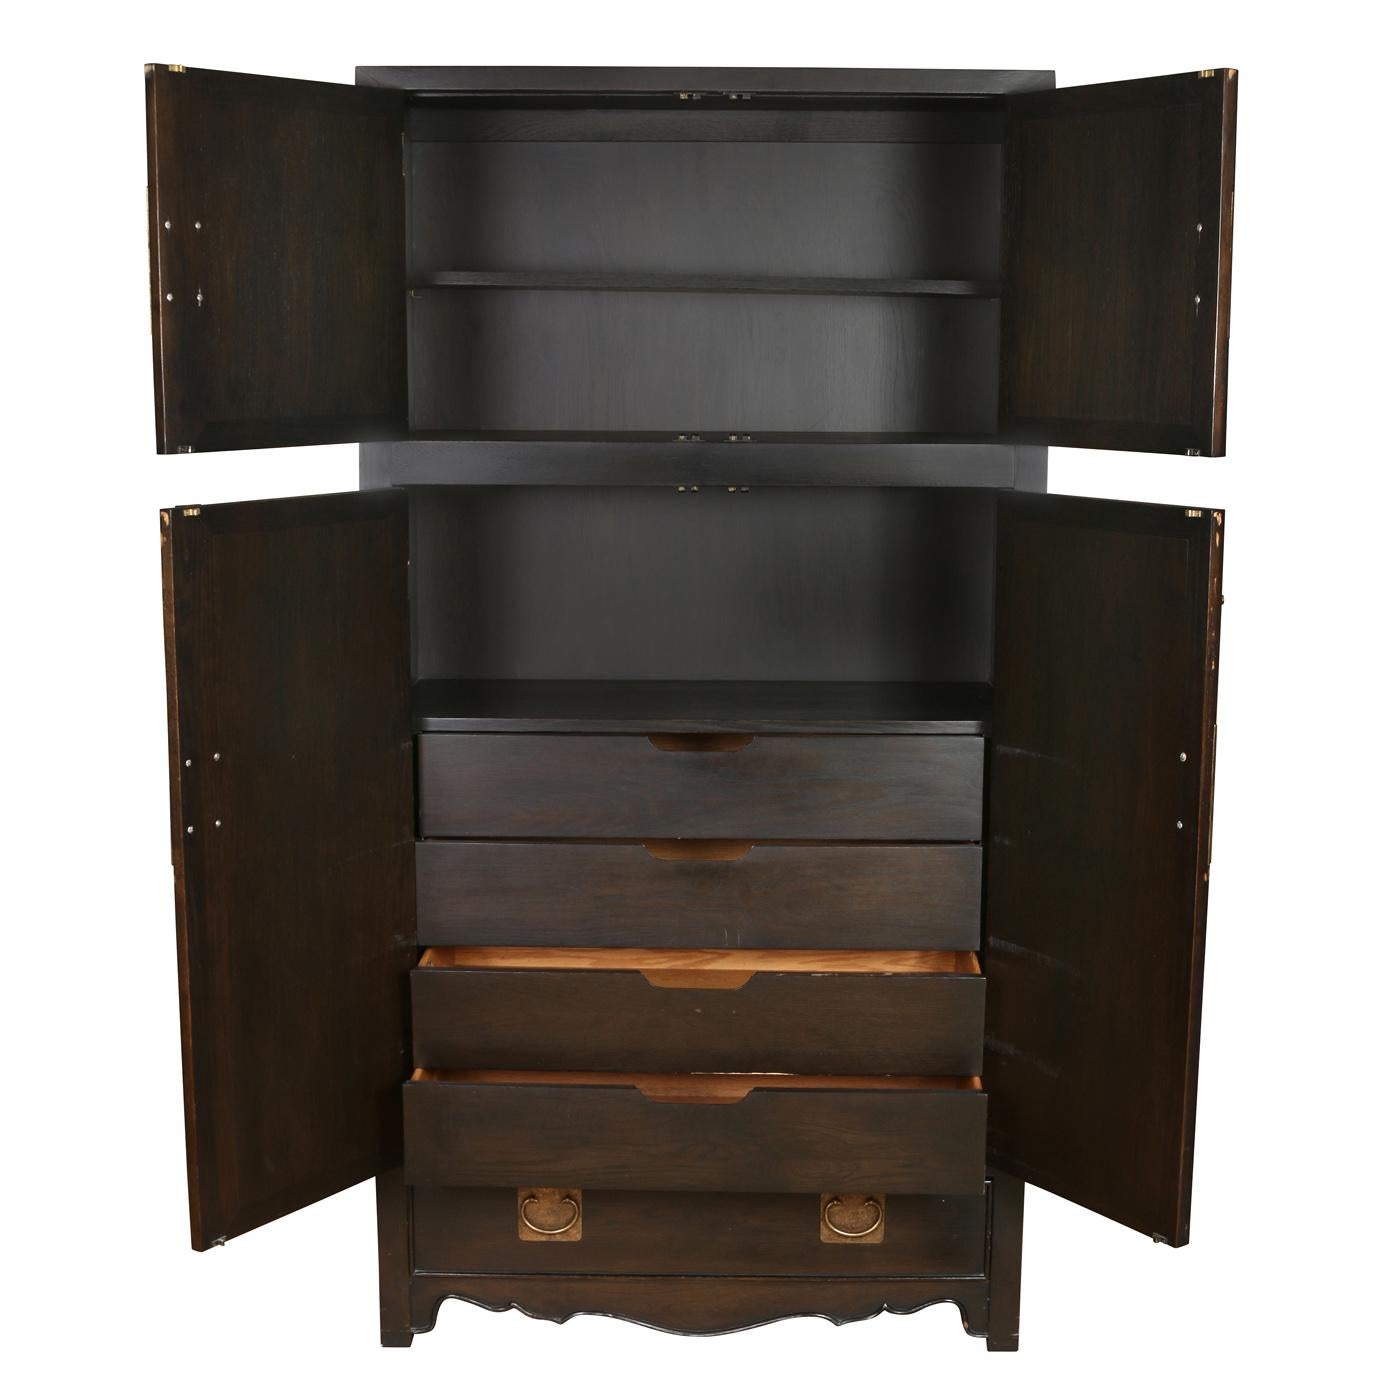 A painted Asian style tall chocolate brown armoire with brass hardware. Two doors open at top with two shelves inside. Two large doors open in the center to reveal four drawers and one large shelf. A single drawer is at the base. Marked John Stuart